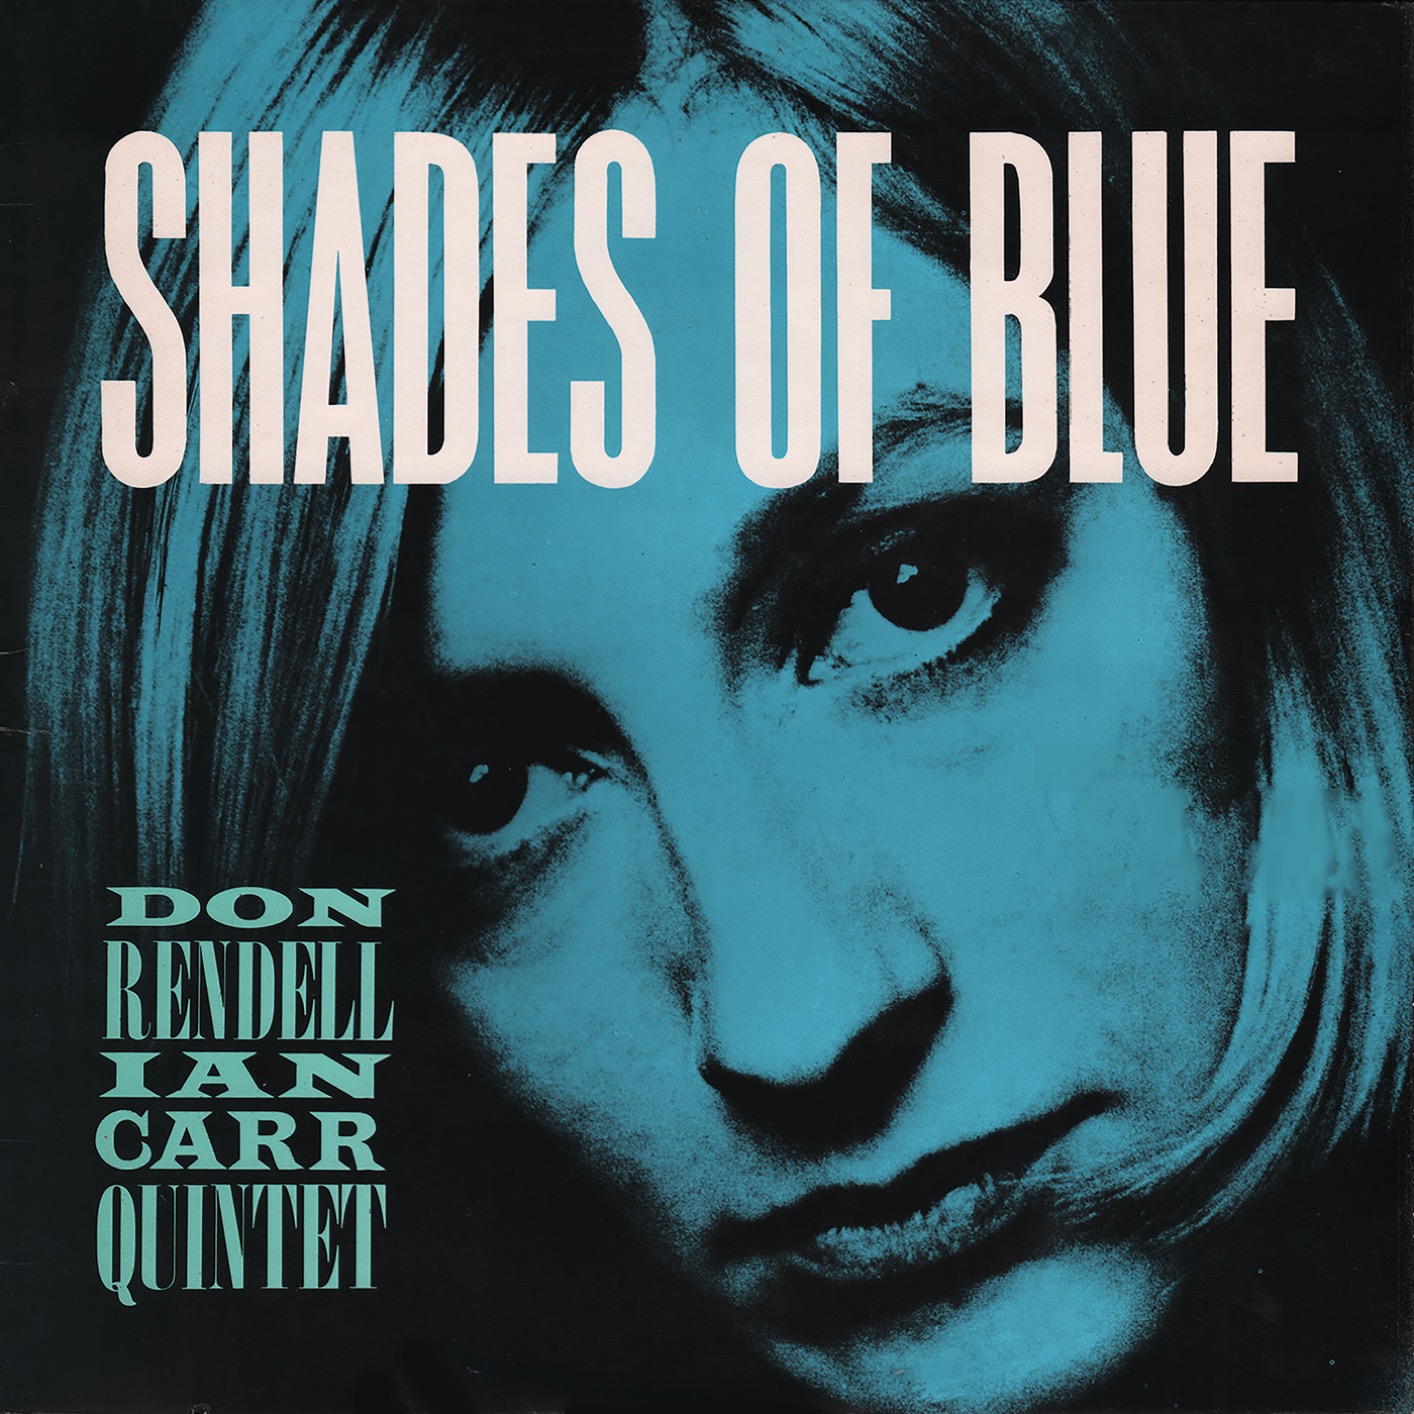 The Don Rendell / Ian Carr Quintet - Shades Of Blue (1965/2018) [FLAC 24bit/96kHz]